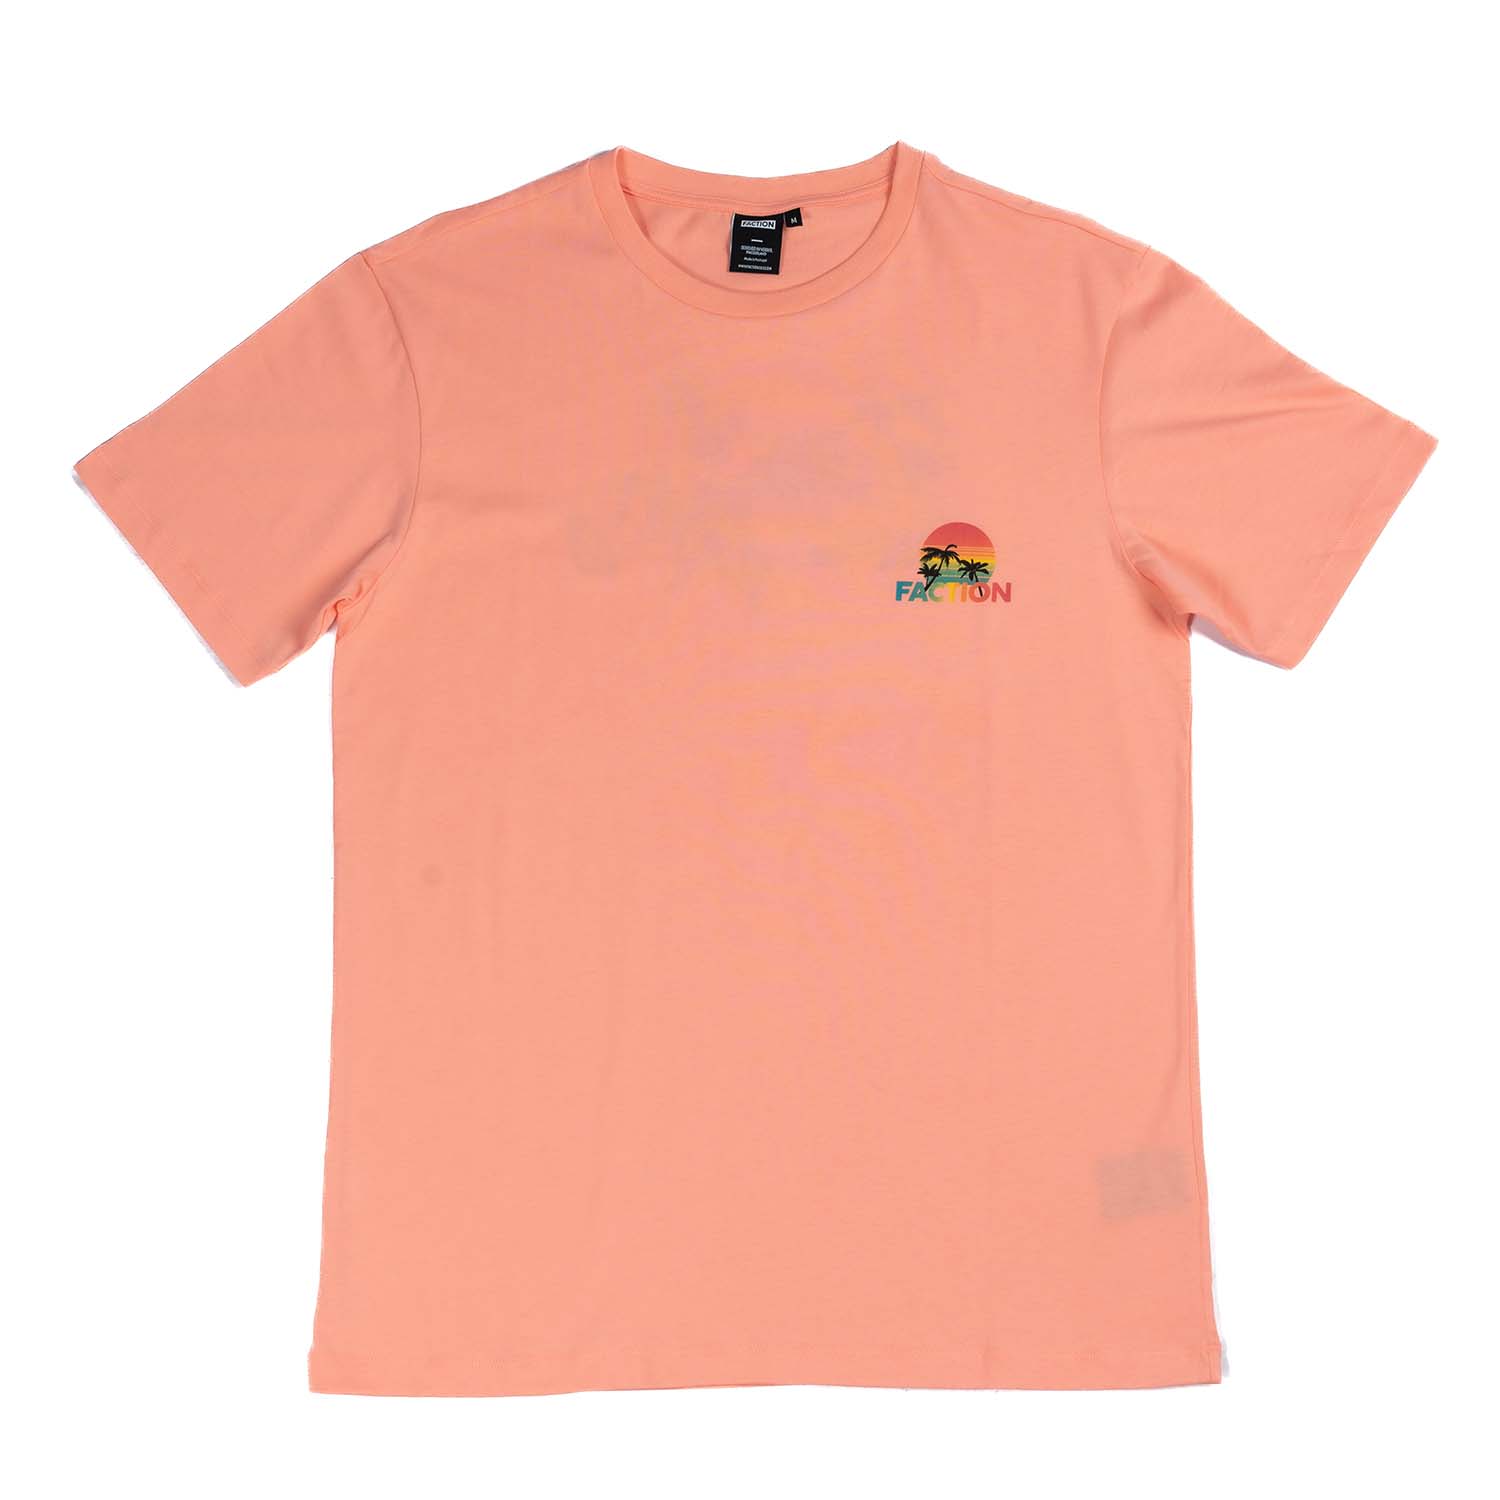 Faction Outcast Tee Pink Flat Lay Front